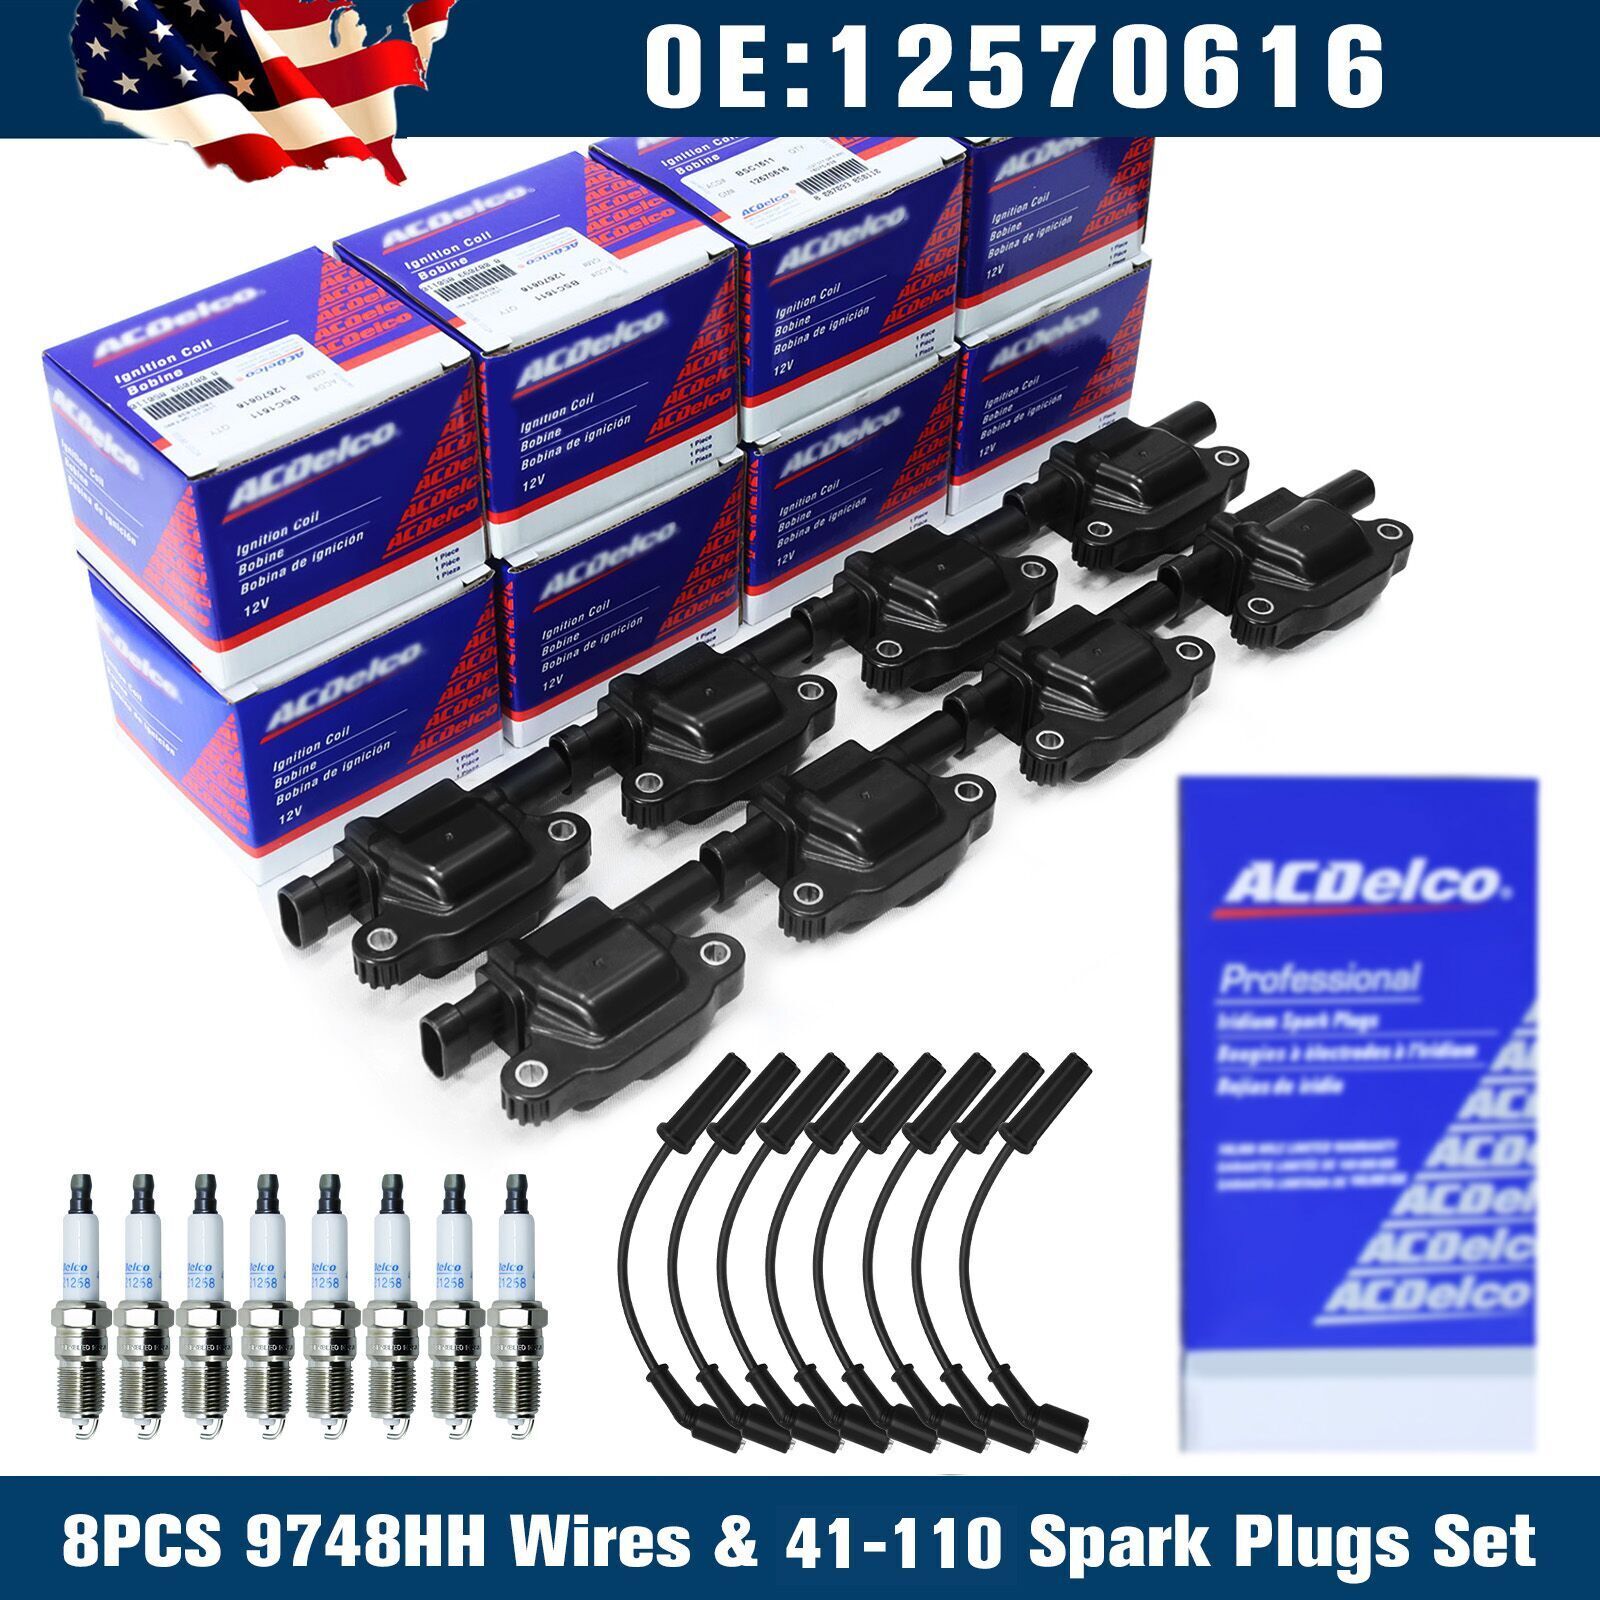 8PC OEM AcDelco UF413 Ignition Coil + 41-110 Spark Plug + 9748UU Wire Fit GMC